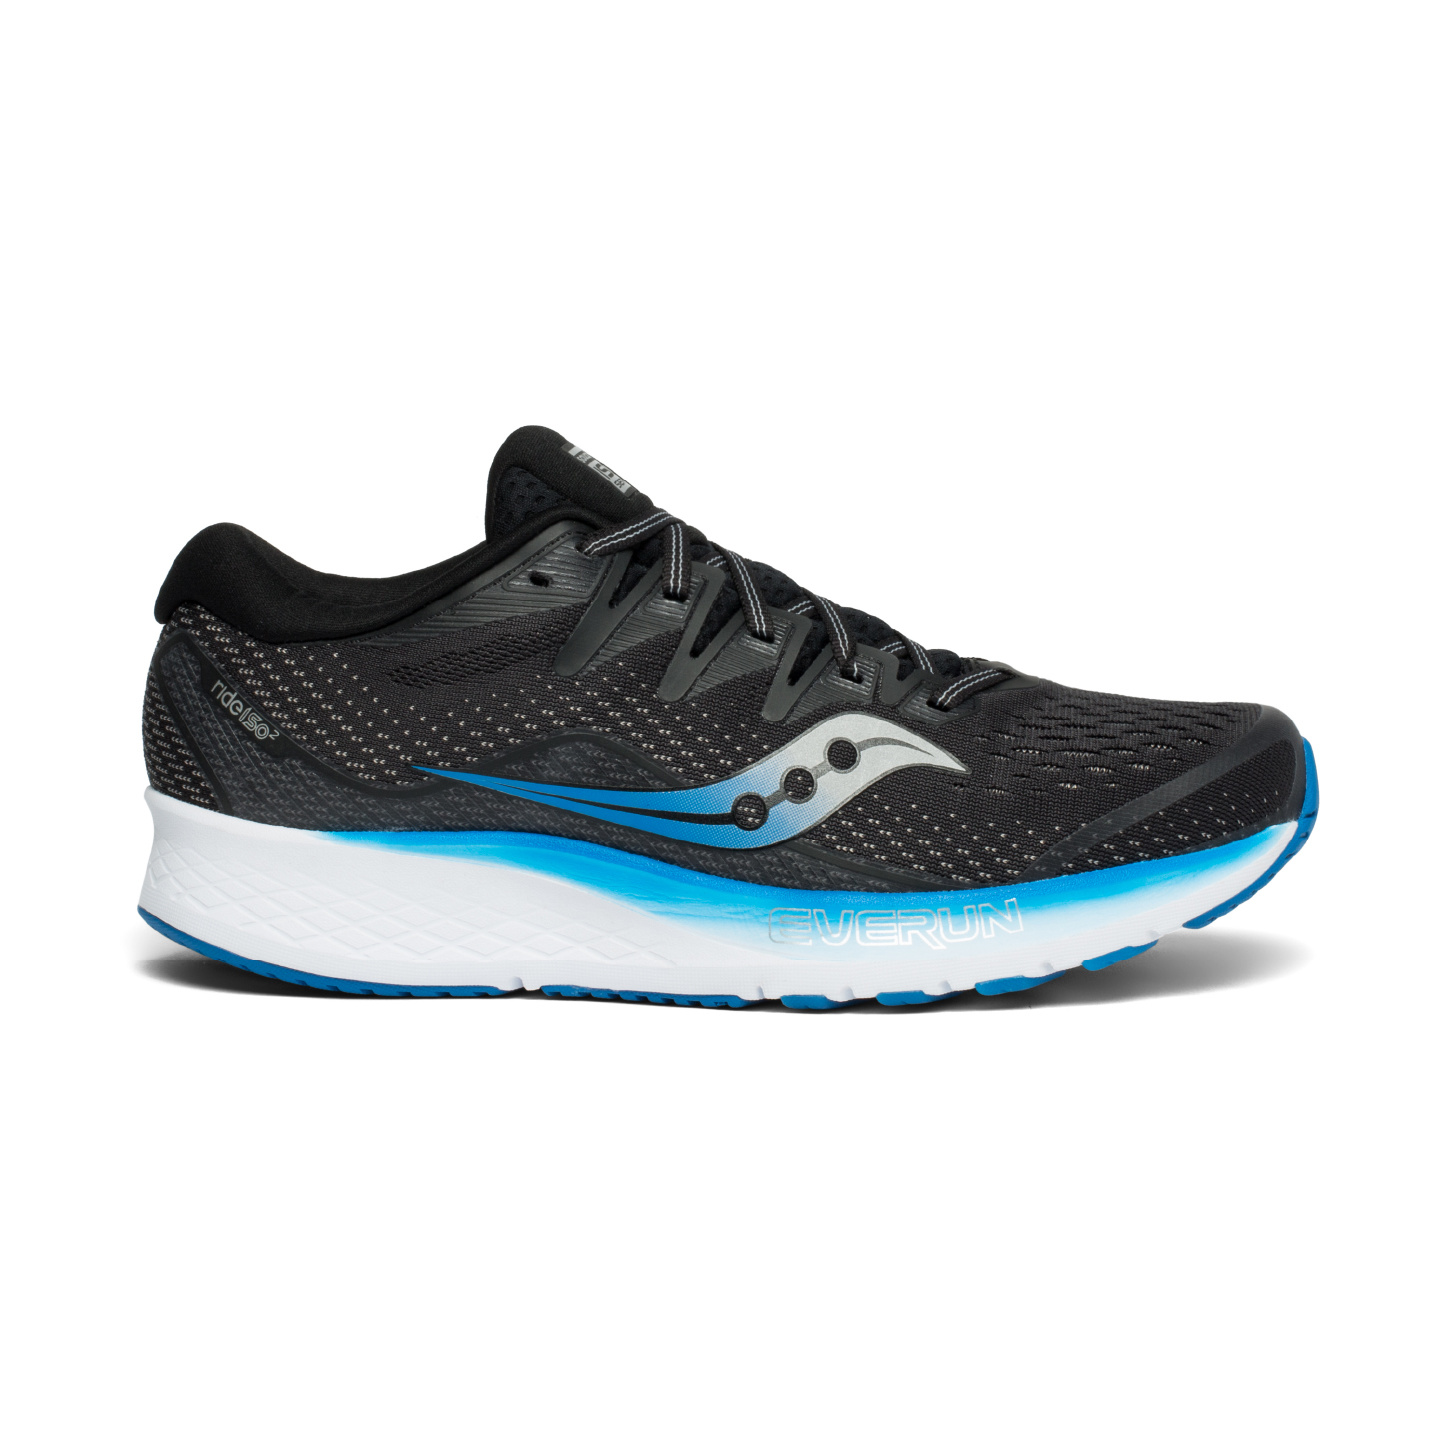 Saucony Ride ISO2 - Mens